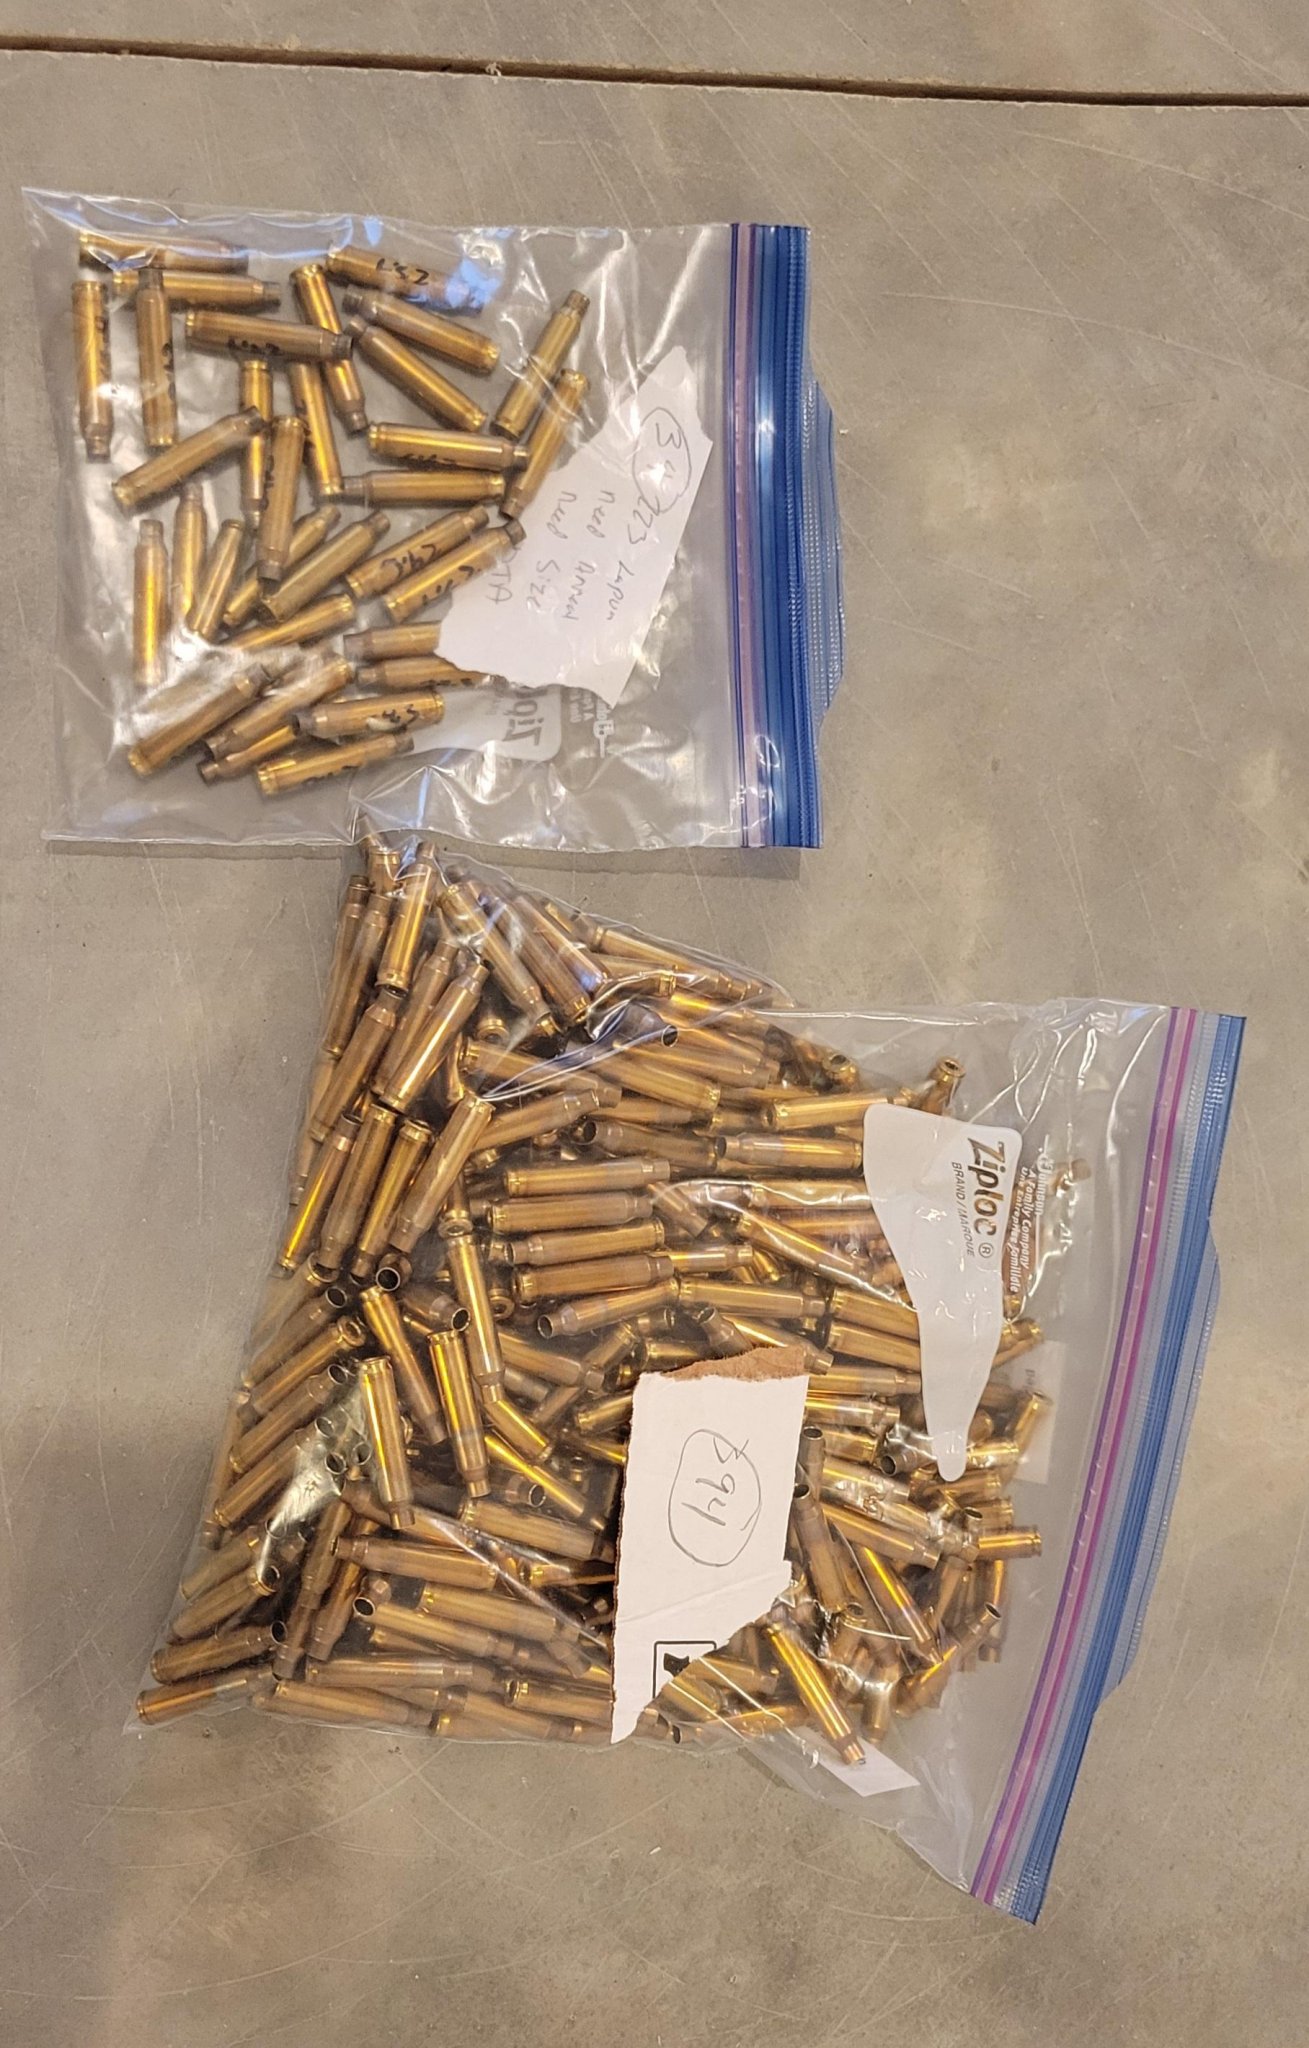 Once Fired Brass, Reloading Supplies